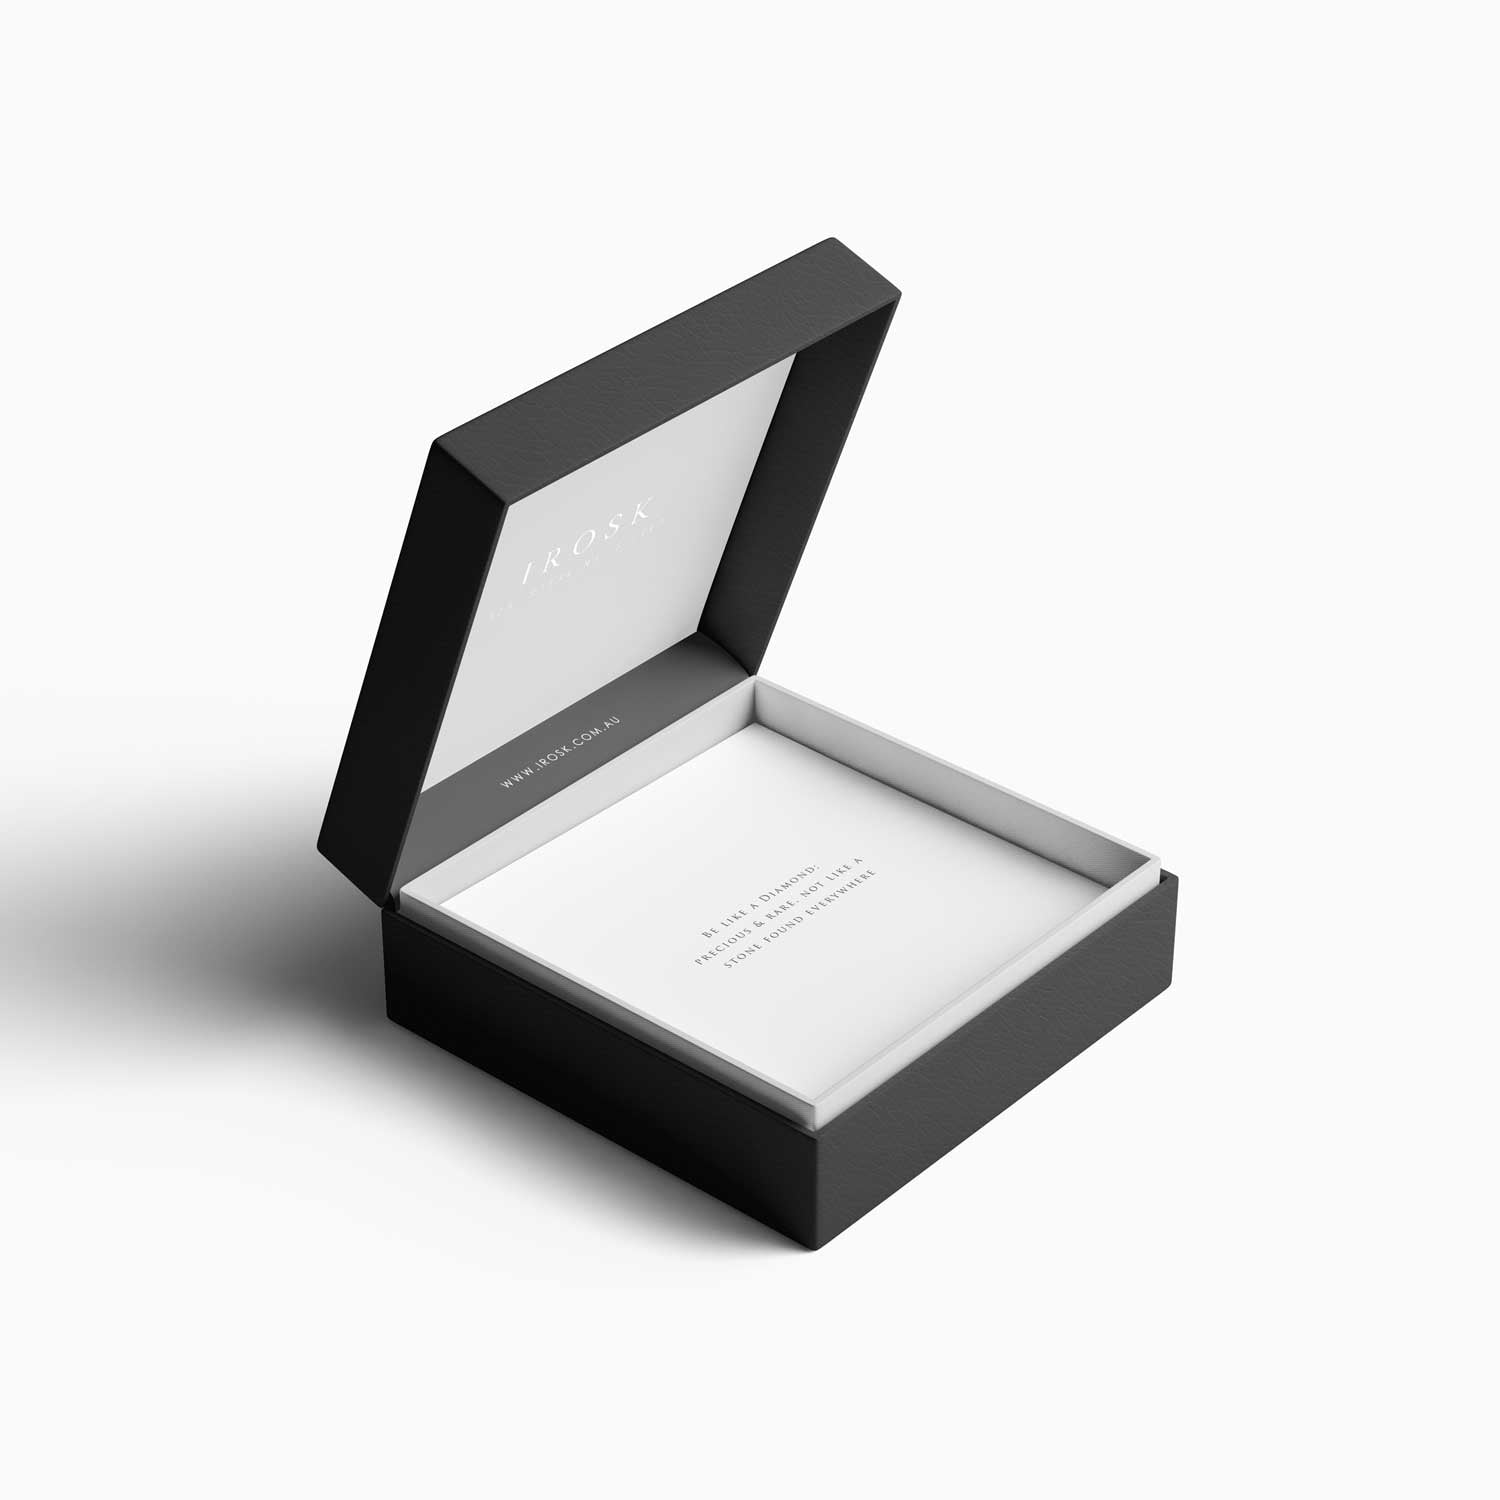 Elegant packaging for your exquisite earrings, ready for gifting or safekeeping.